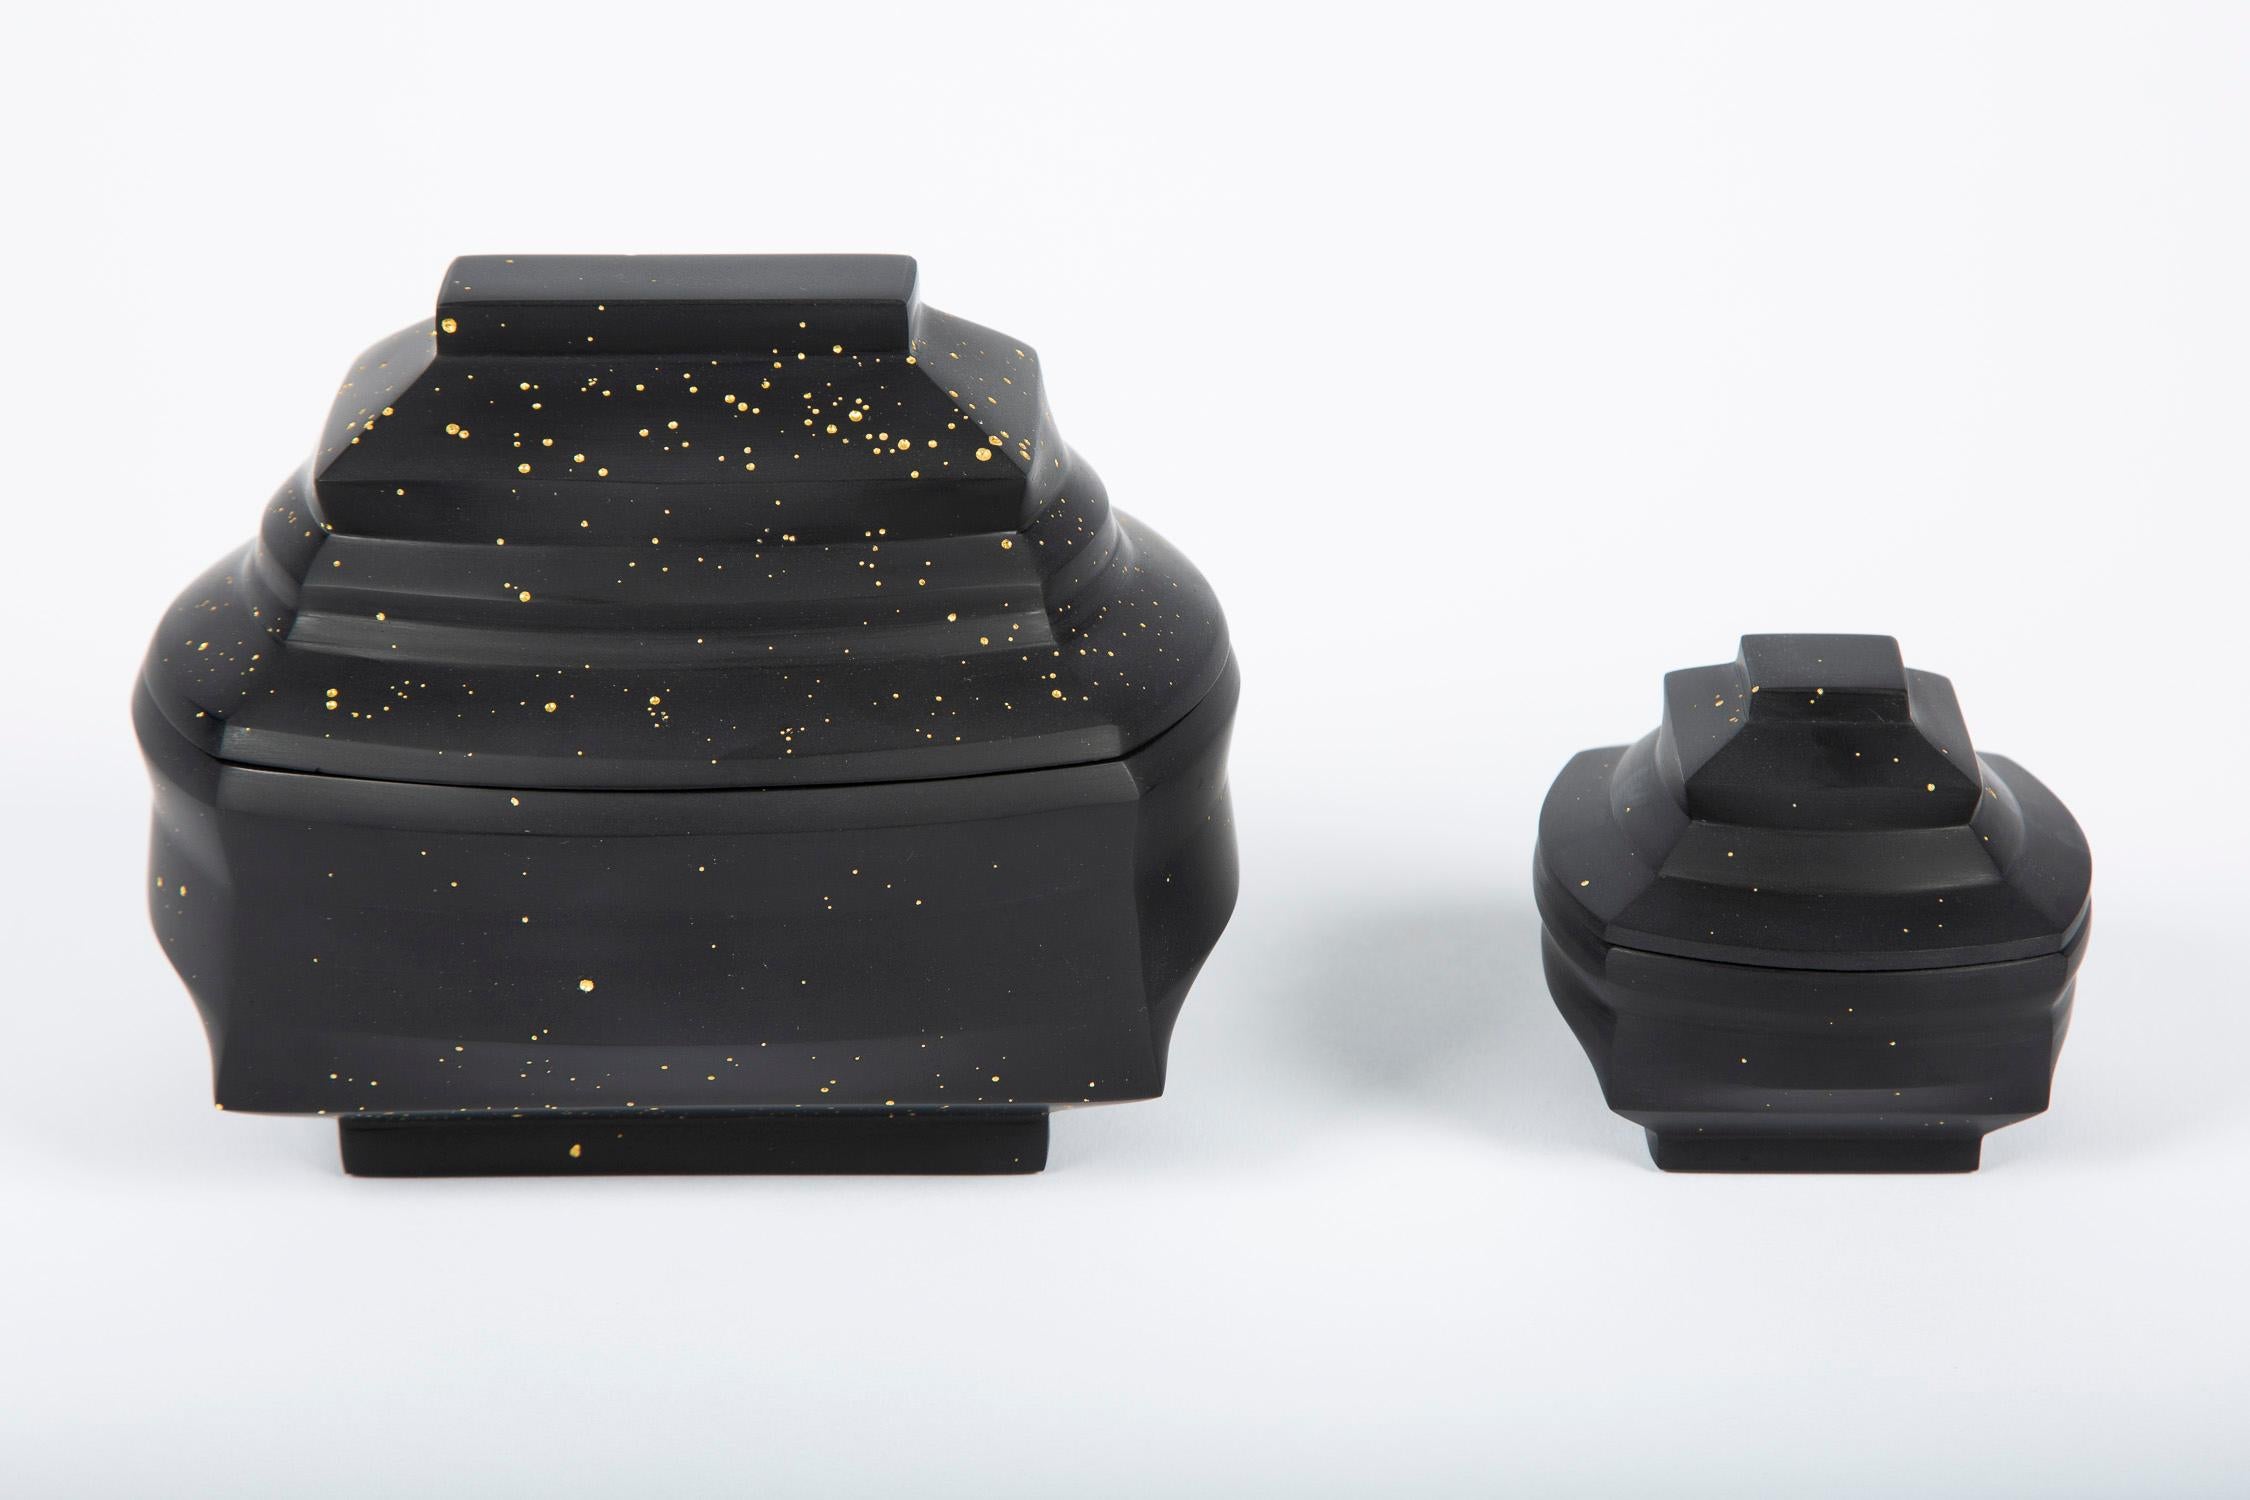 Contemporary Daam Dah Triptych, a Unique Artglass Set of Three Lidded Boxes by Choi Keeryong